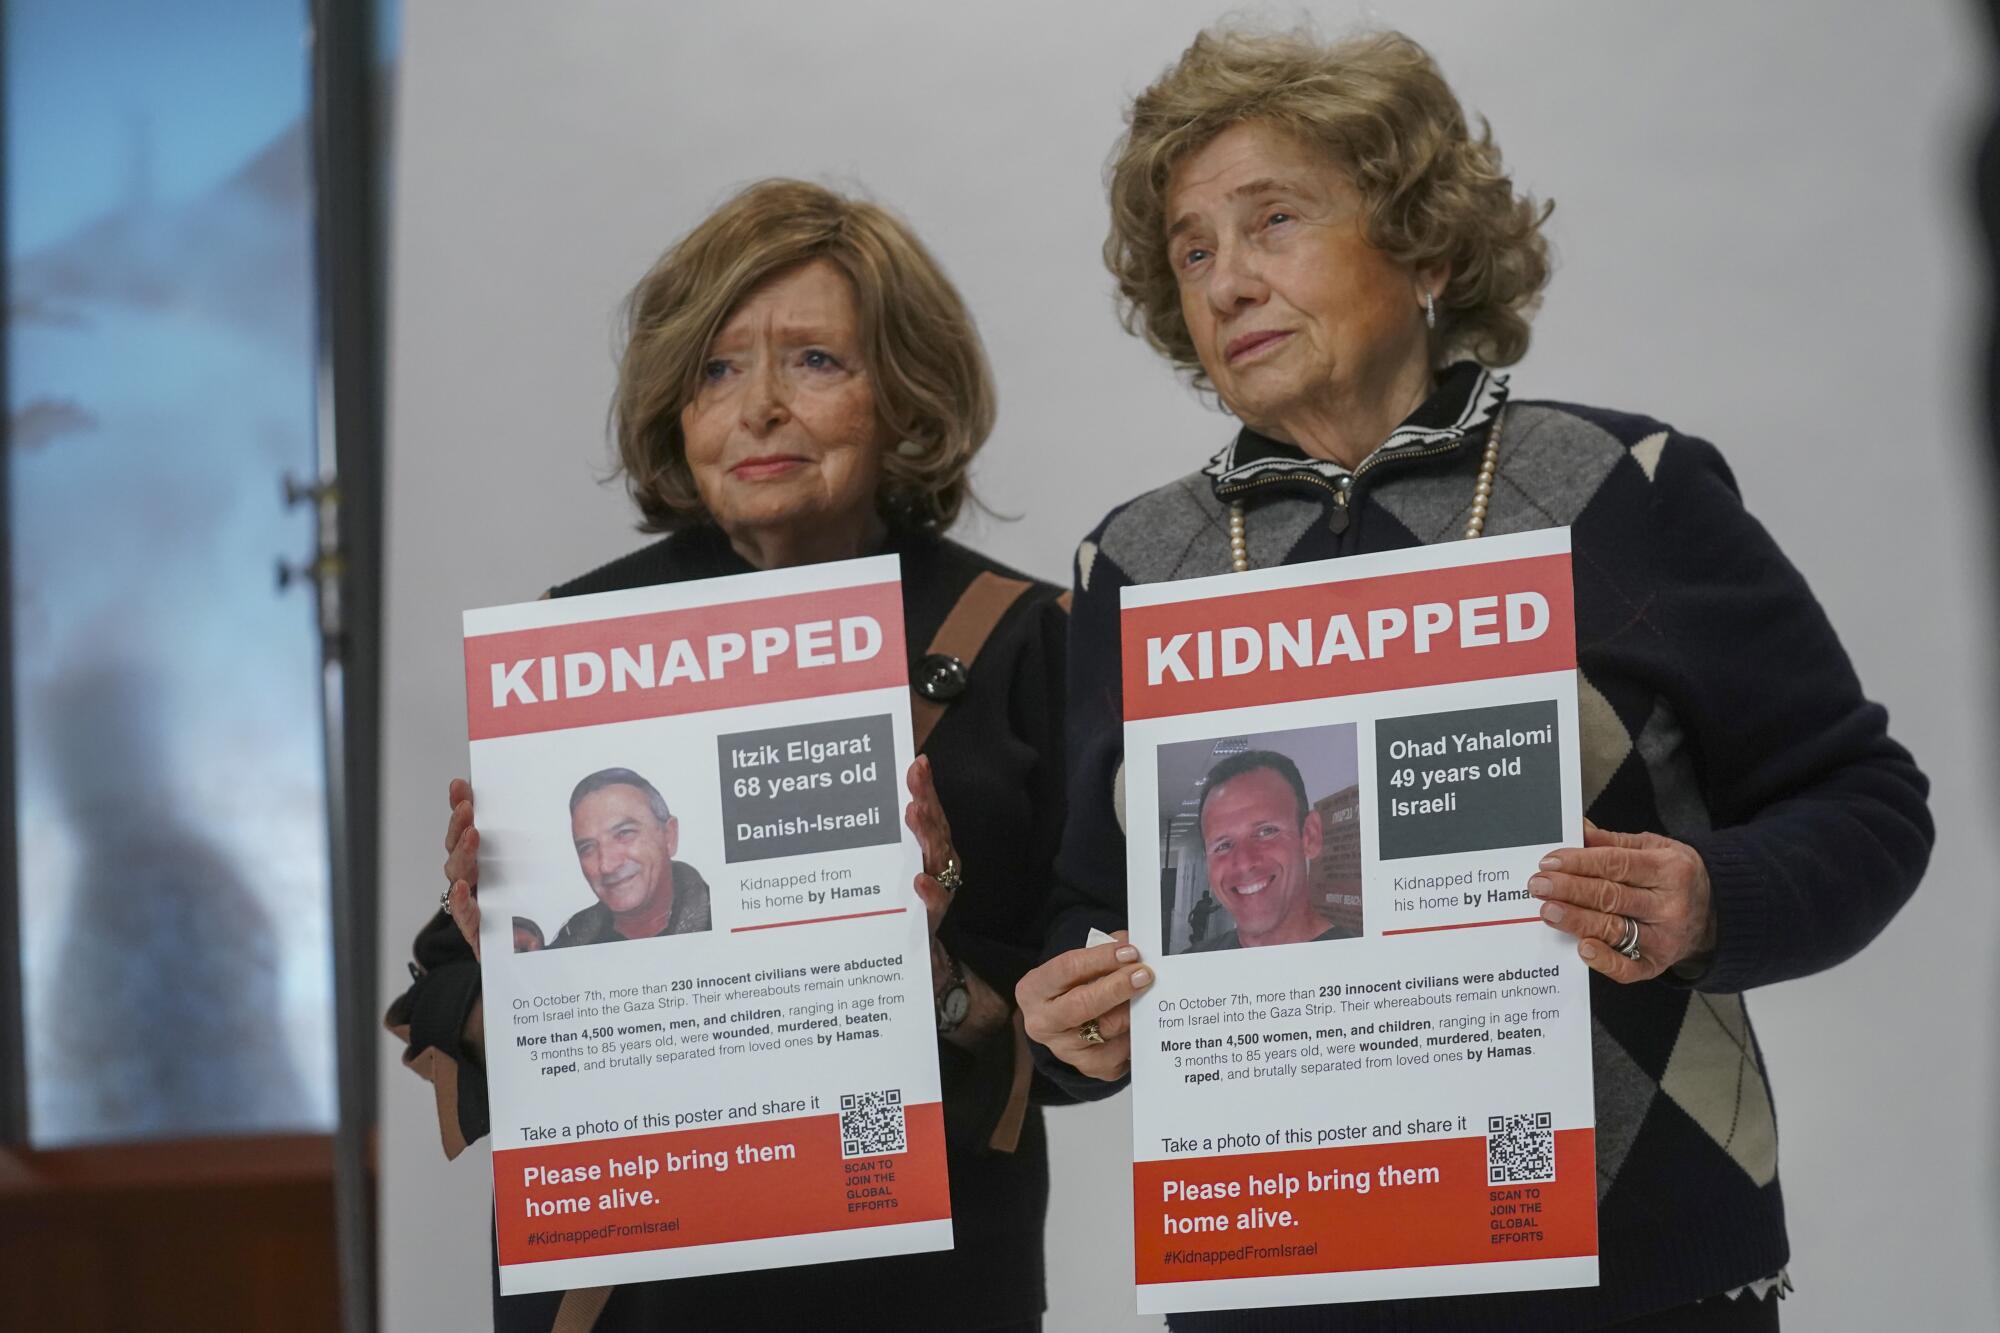 Two women hold up "Kidnapped" posters showing Israeli hostages.